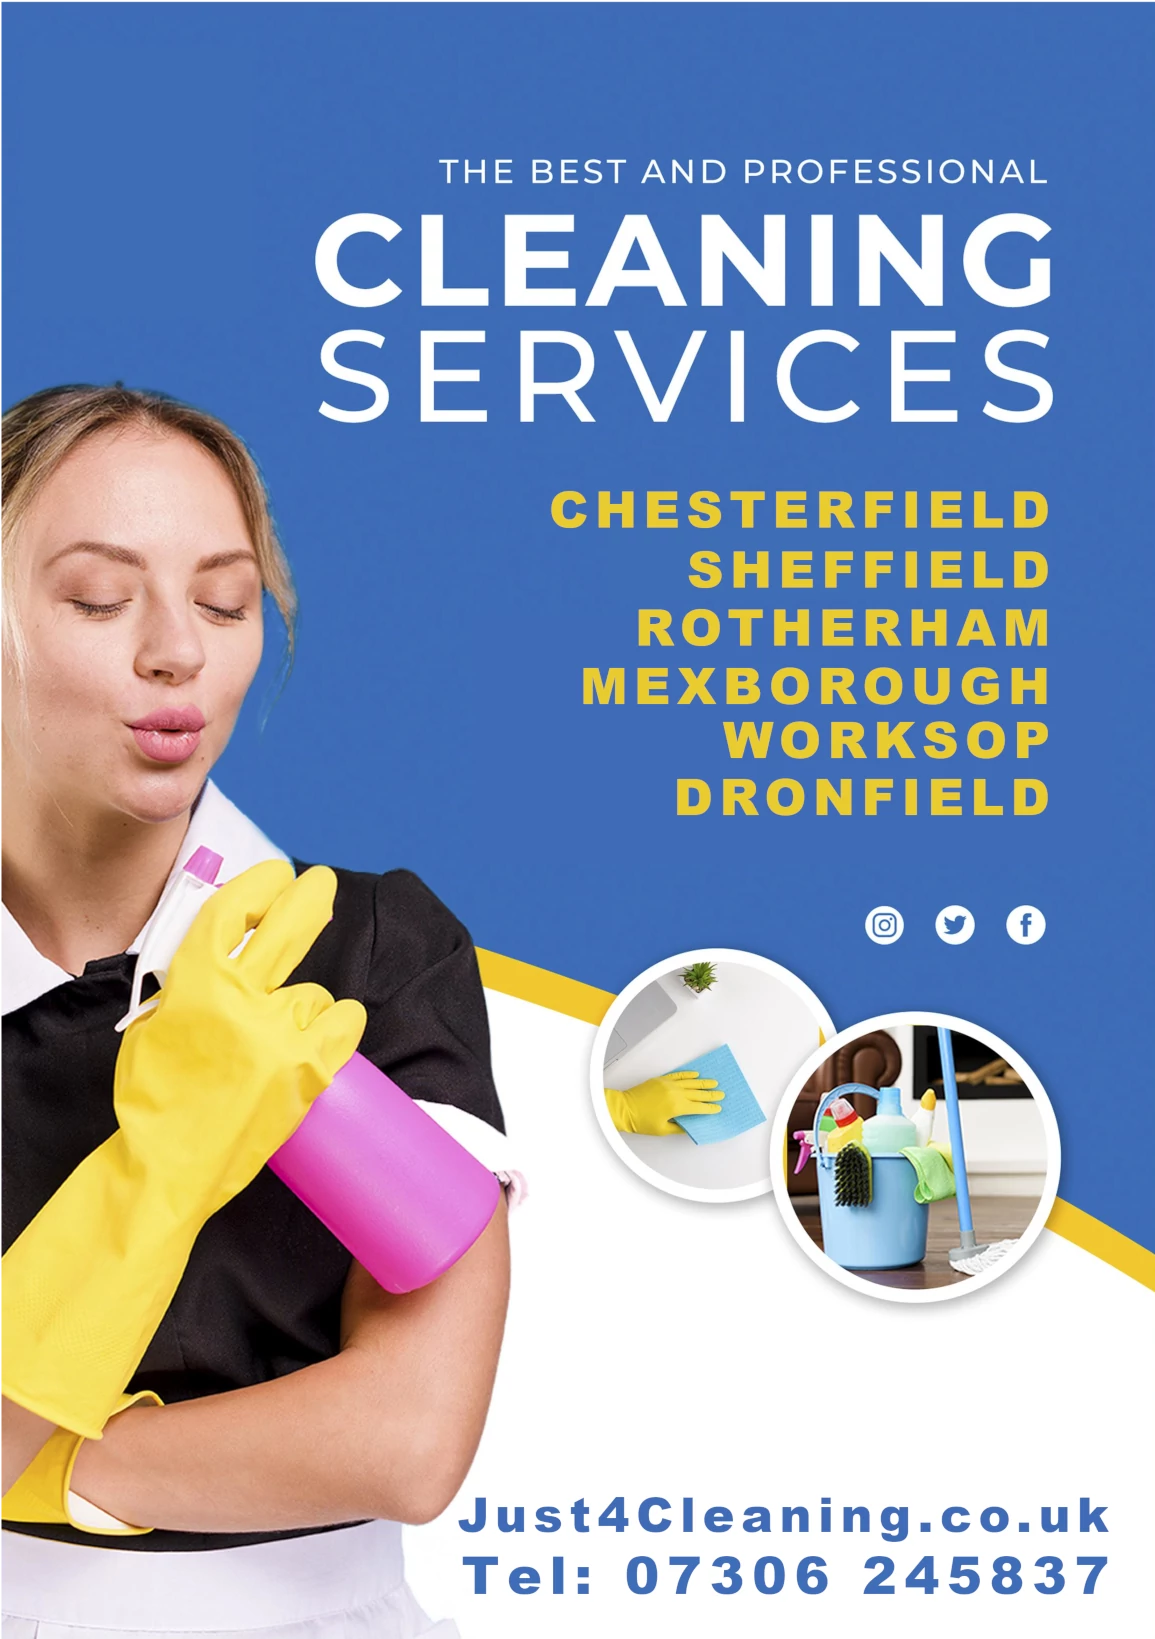 local cleaner near me, pic of cleaning lady